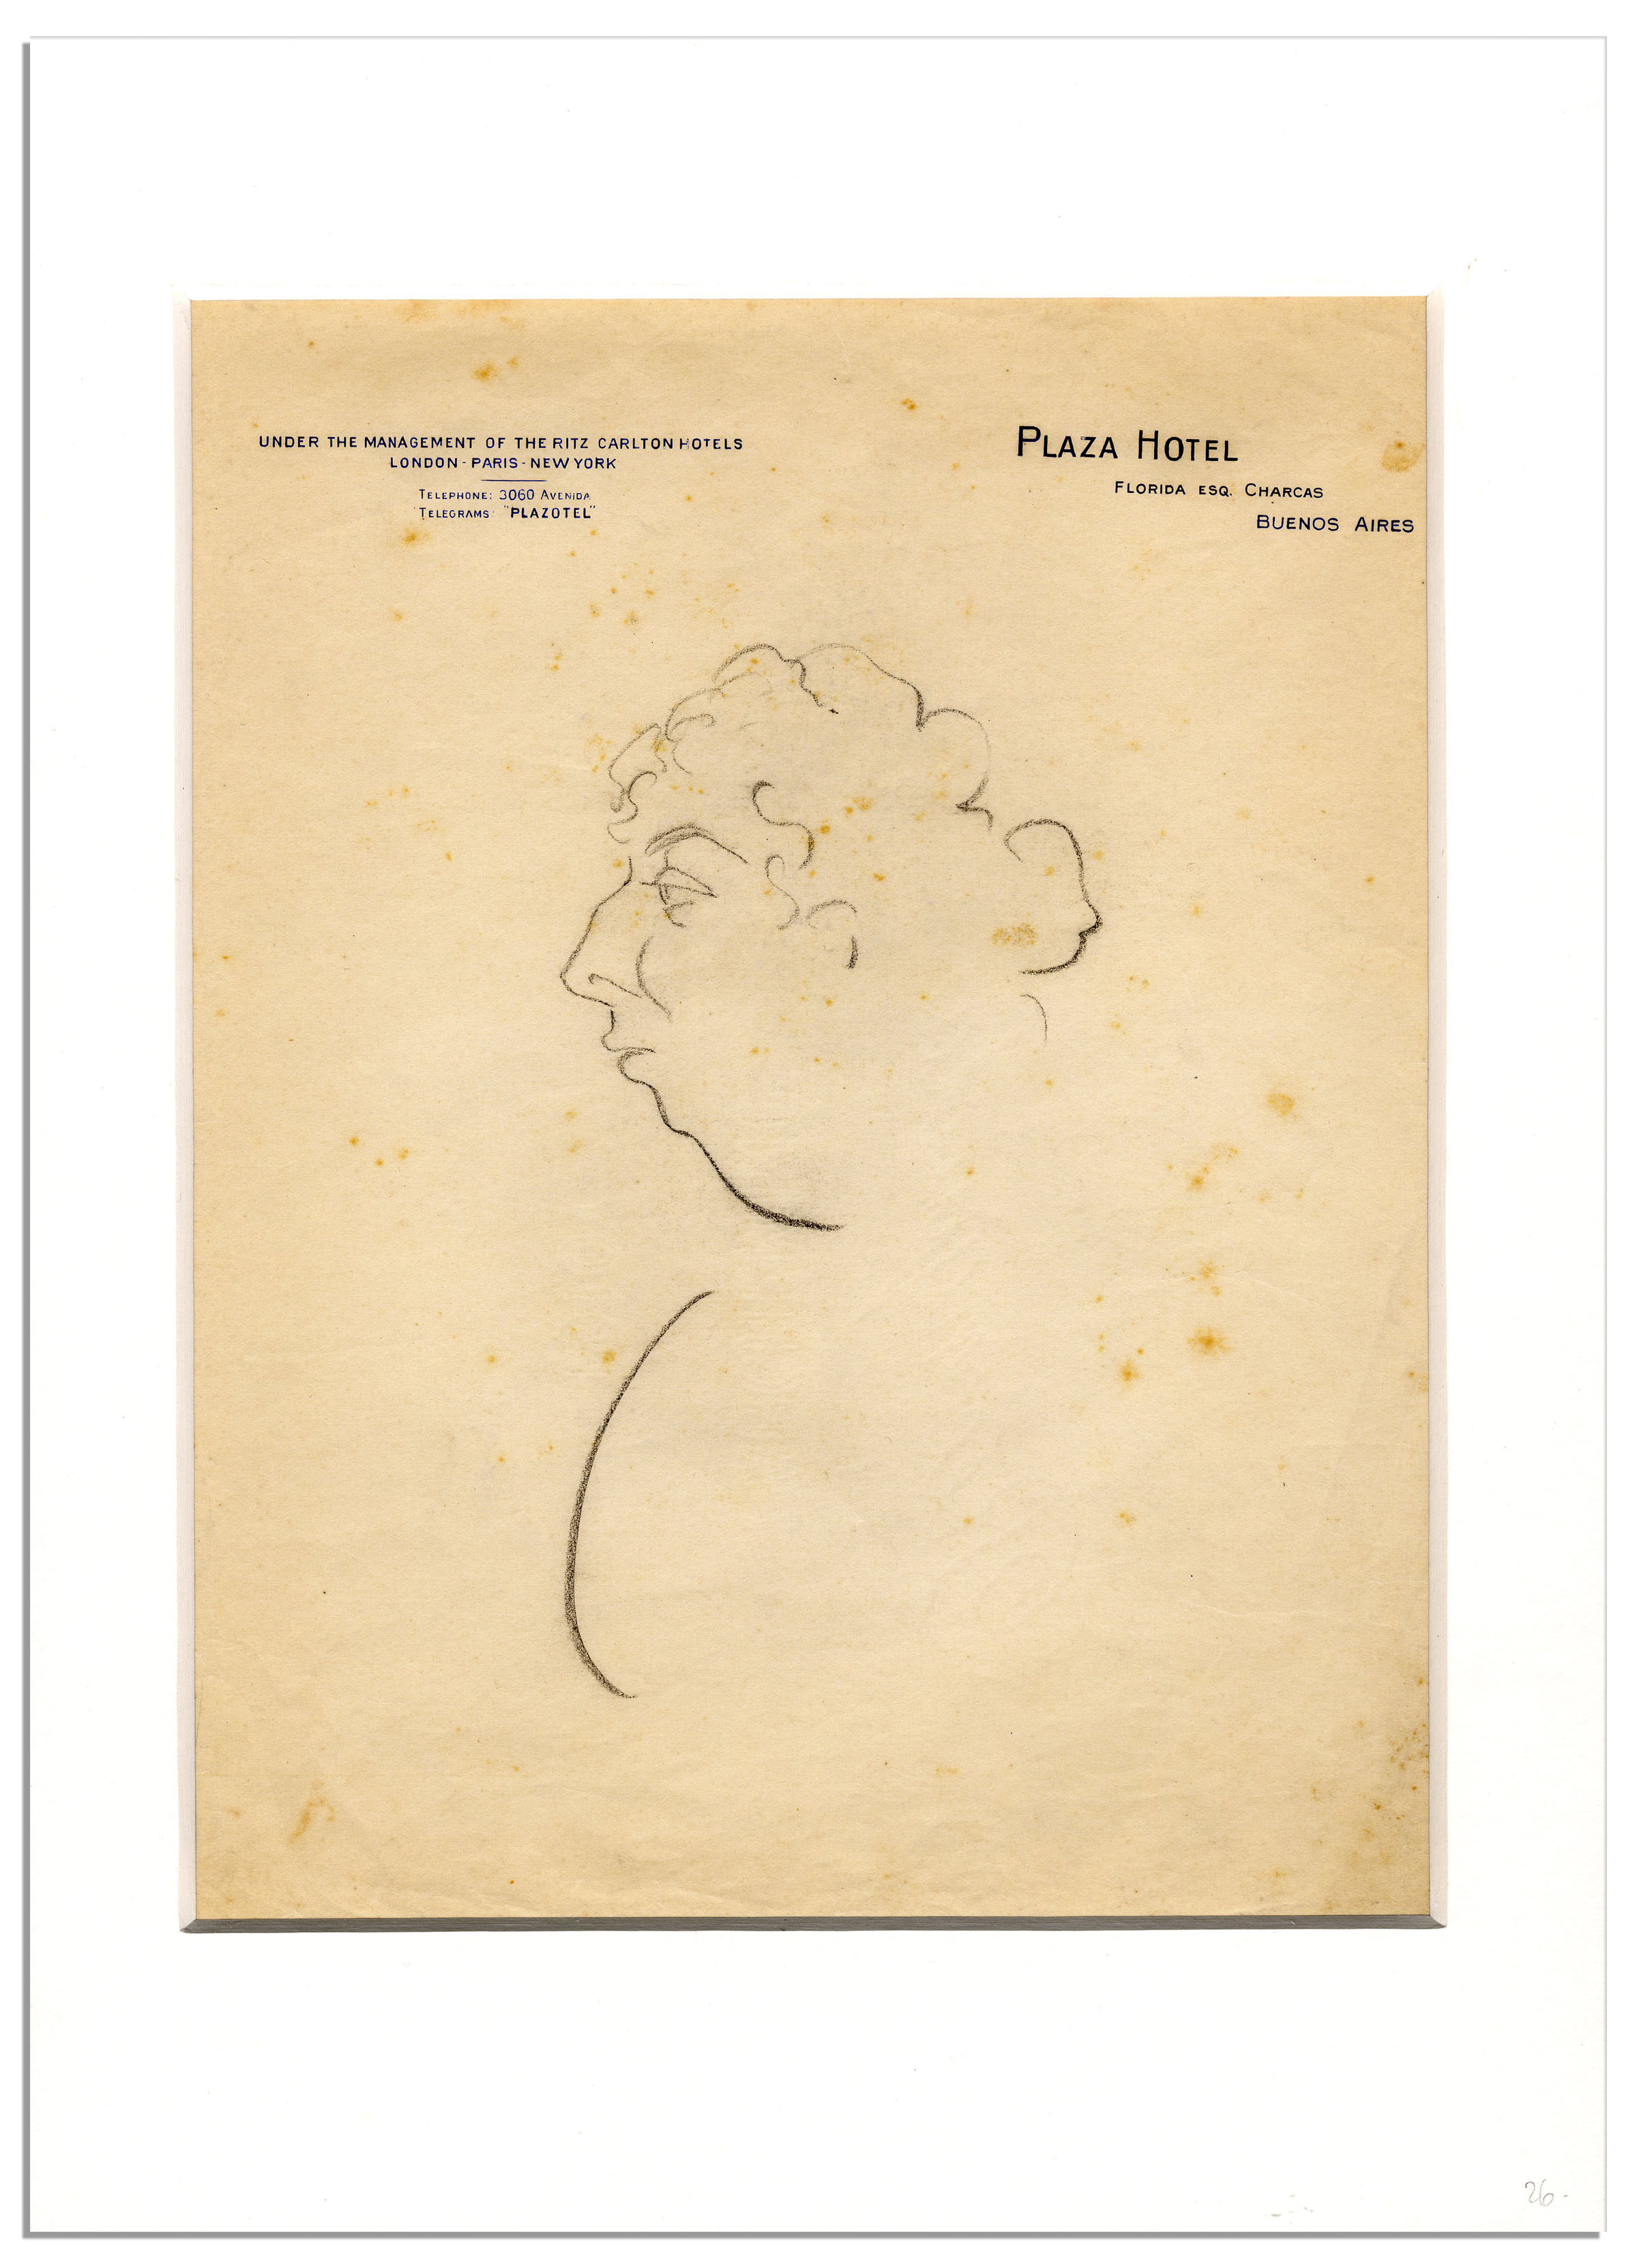 Classical, Country & Jazz Enrico Caruso Hand-Drawn Sketch, Circa 1917 While Performing in ''